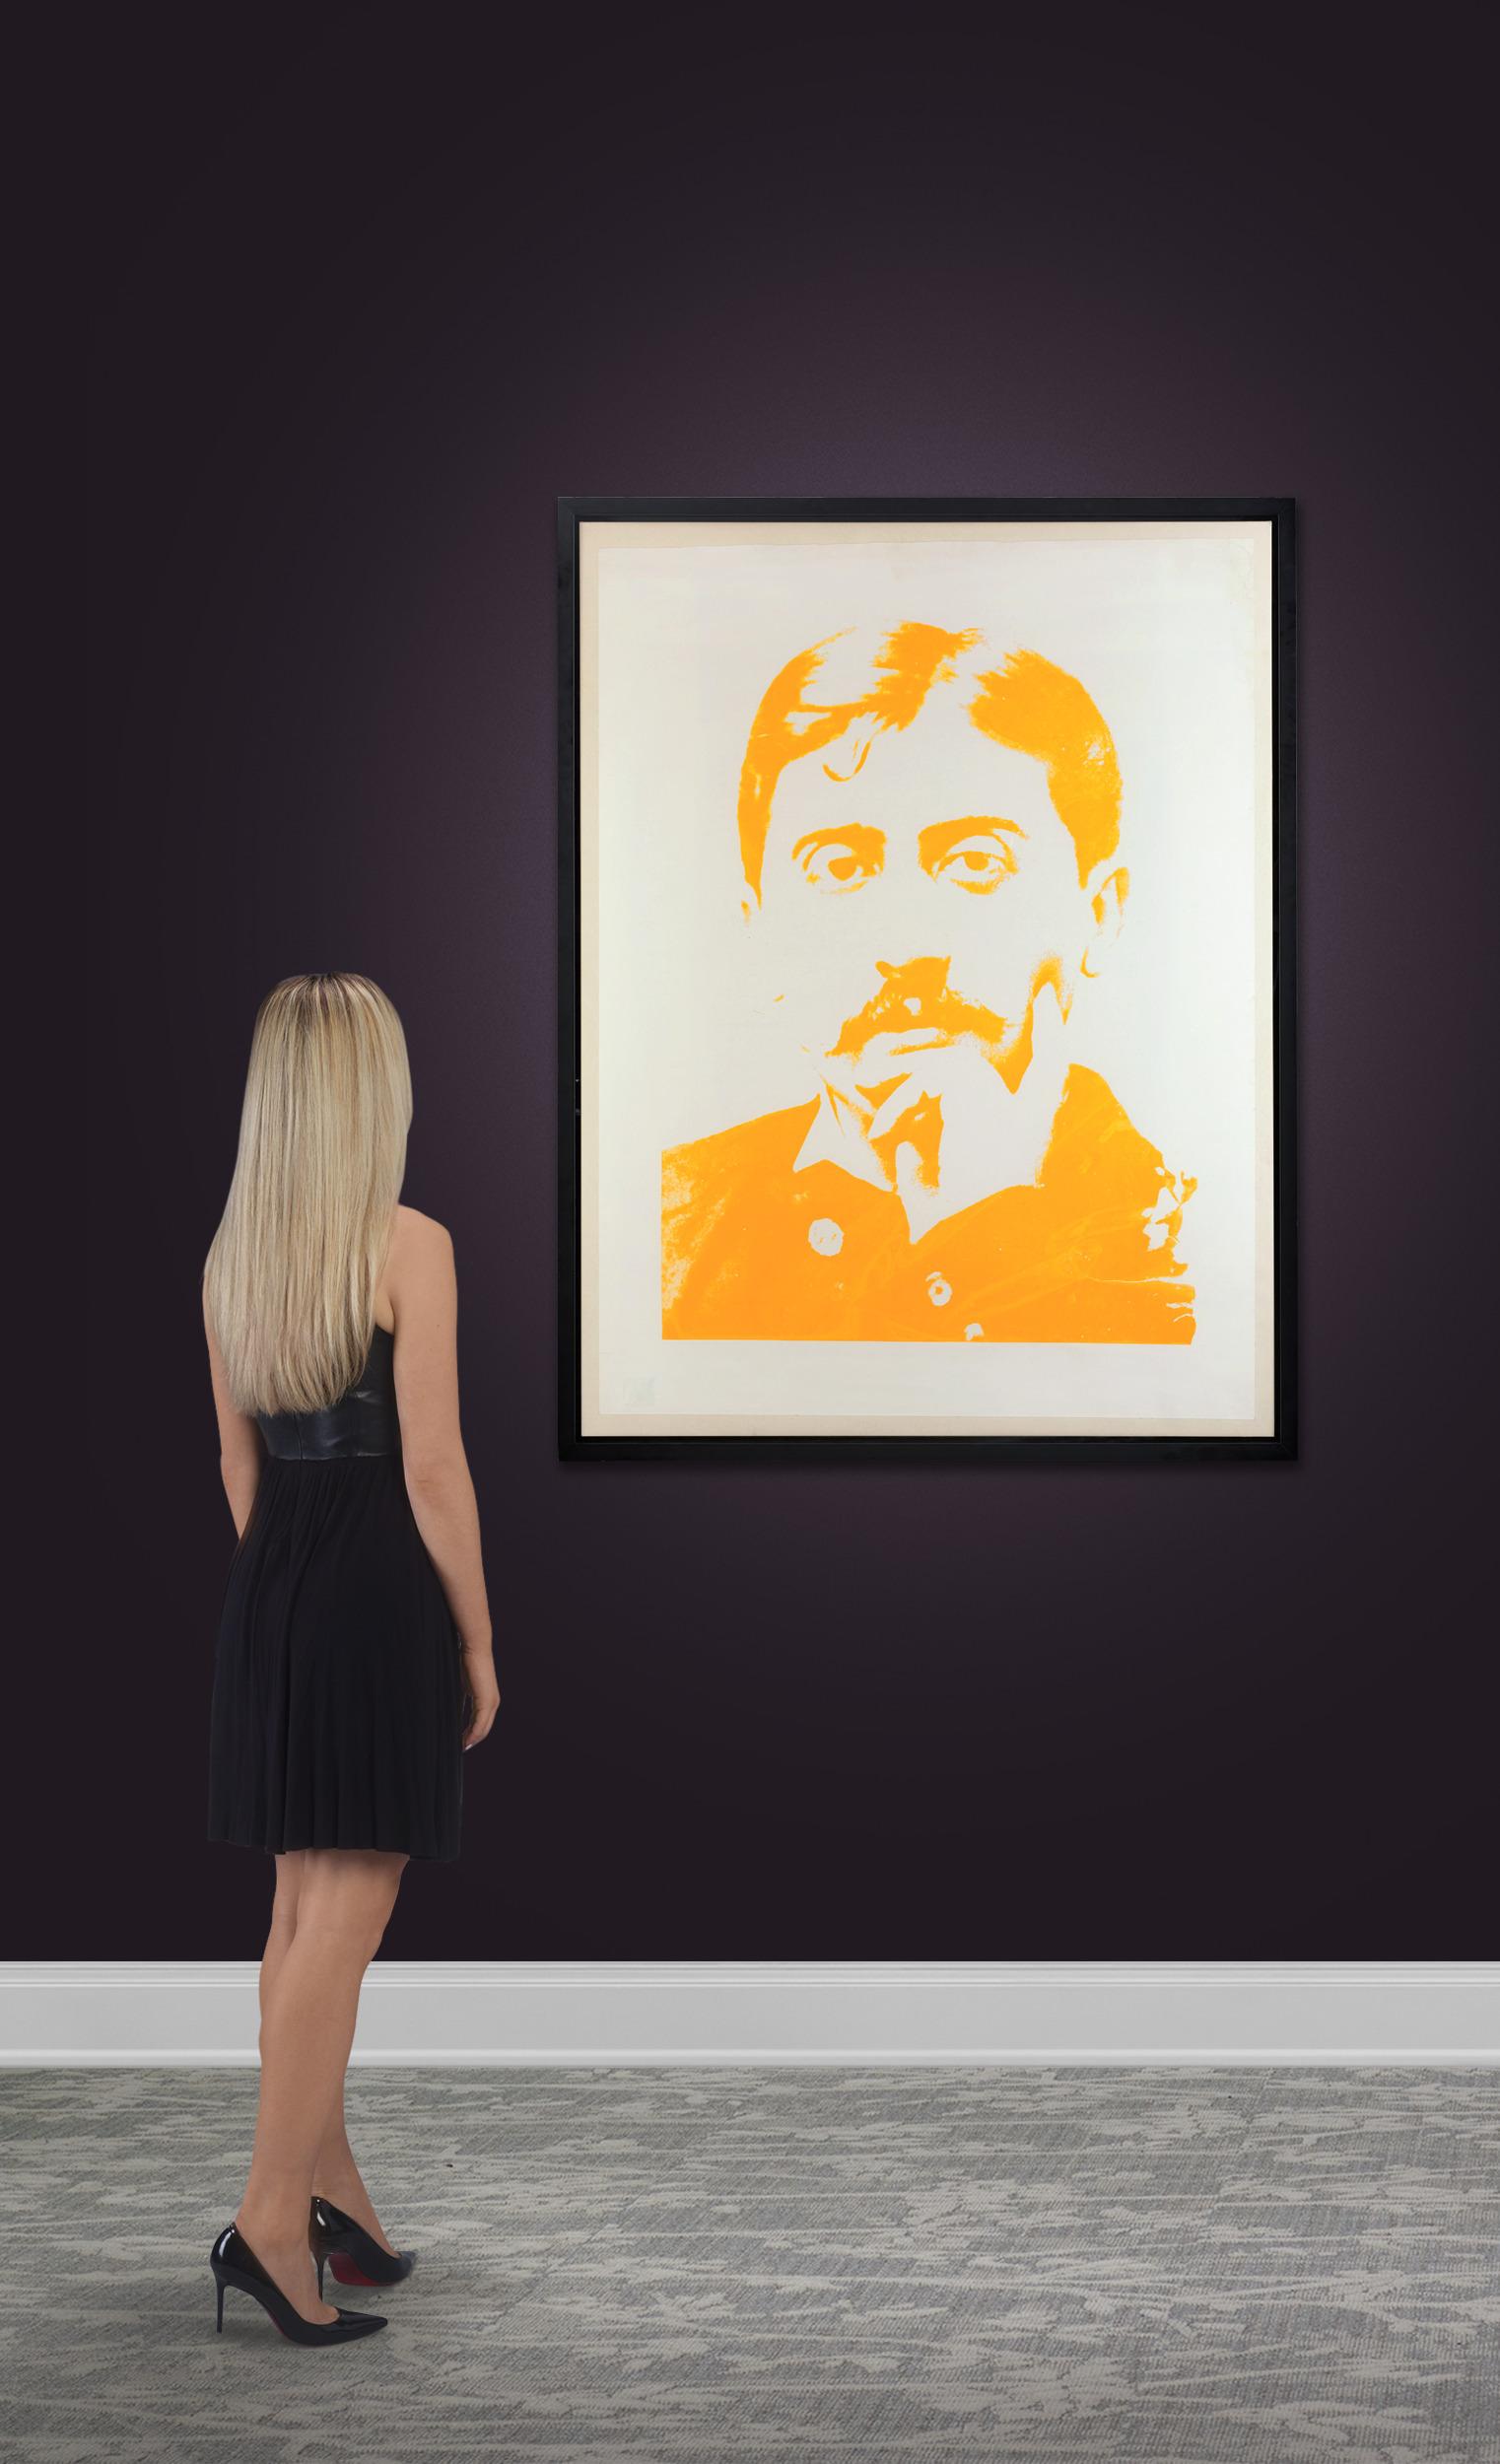 Andy Warhol
1928-1987  American

Portrait of Proust

Screenprint on paper laid on canvas

Created by legendary Pop artist Andy Warhol, Portrait of Marcel Proust holds a special place in the prolific artist's oeuvre. Commissioned by art dealer